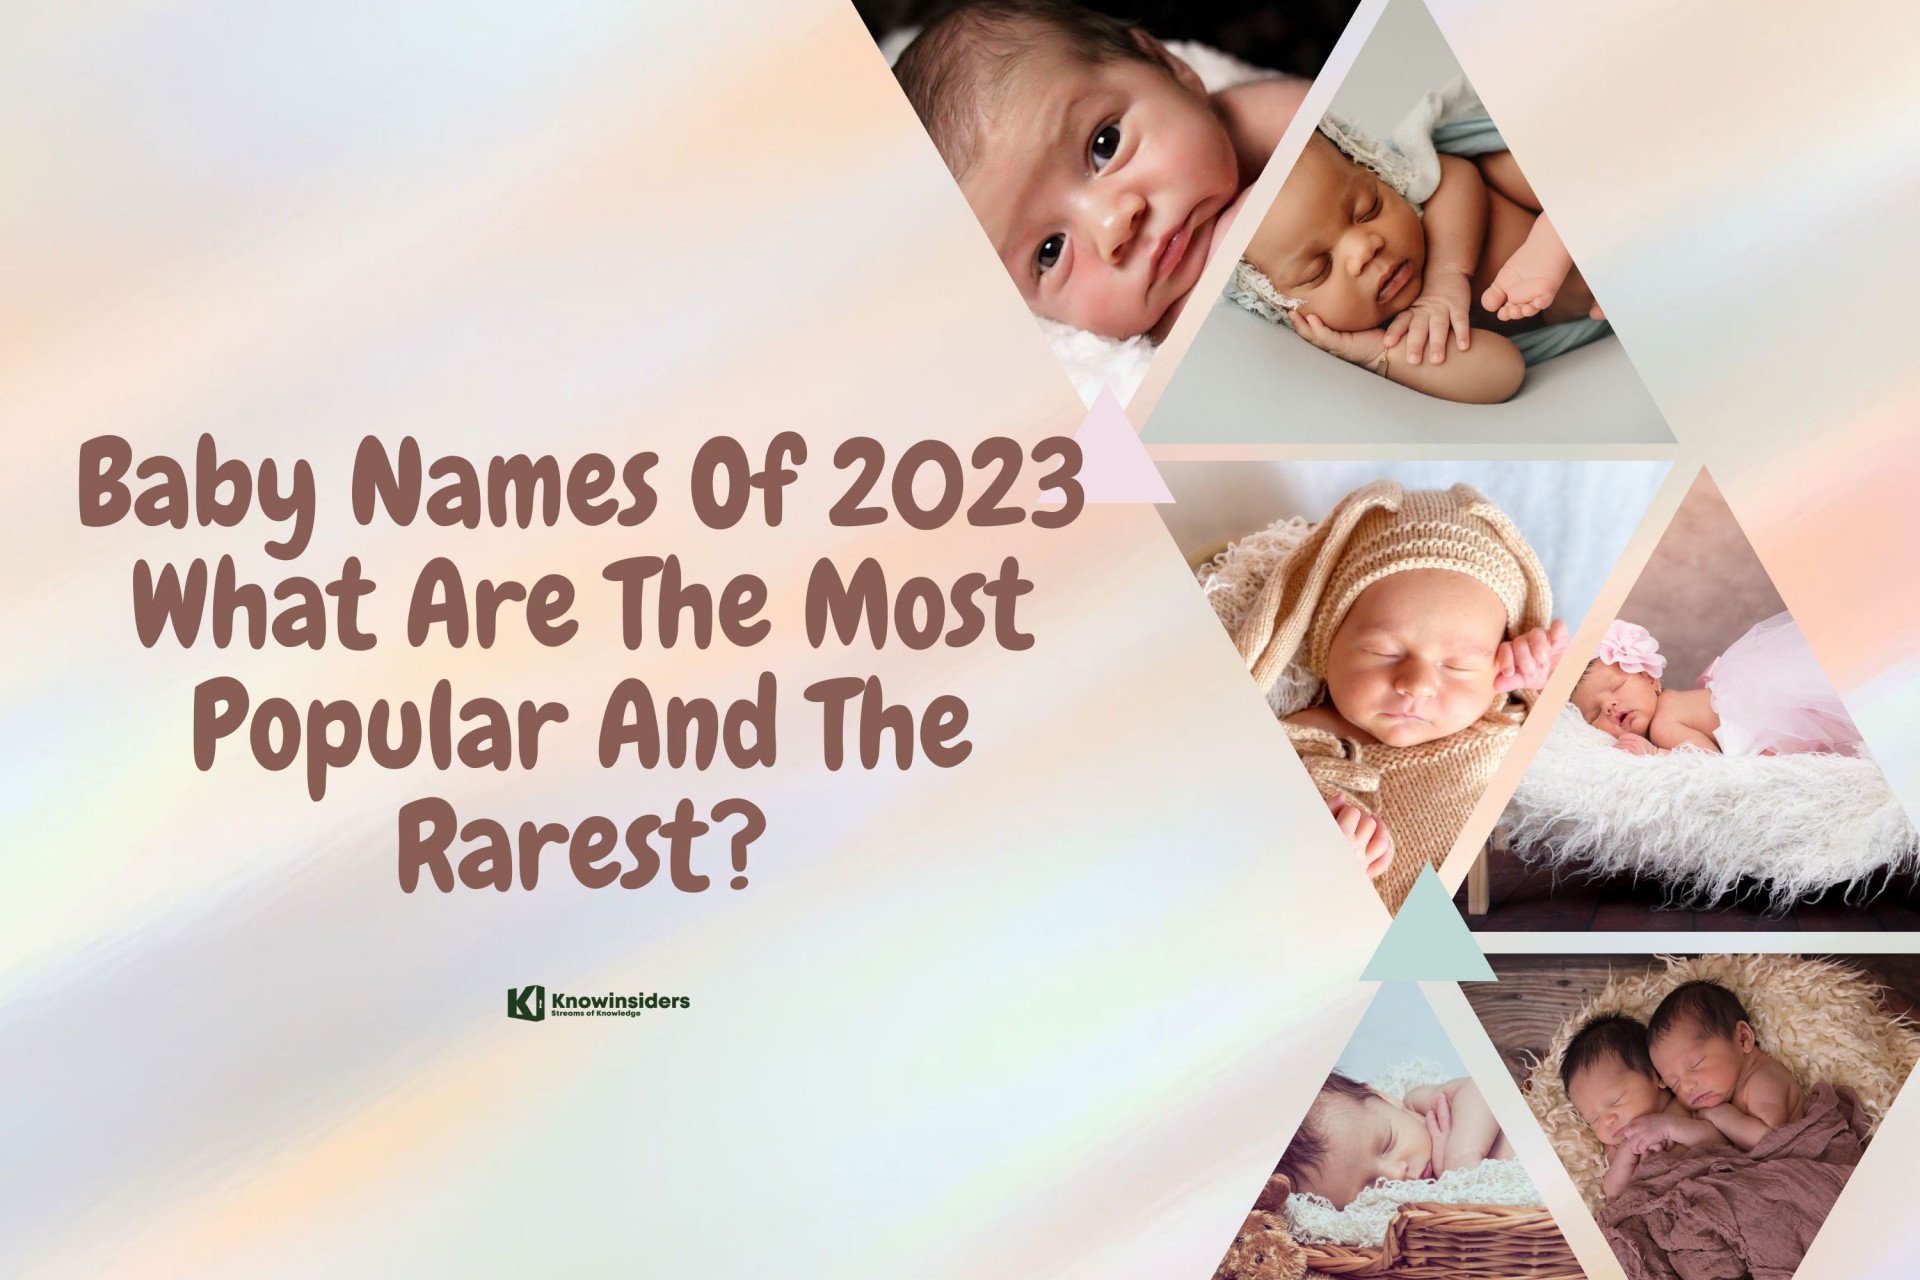 The Most Popular And Rarest Baby Names